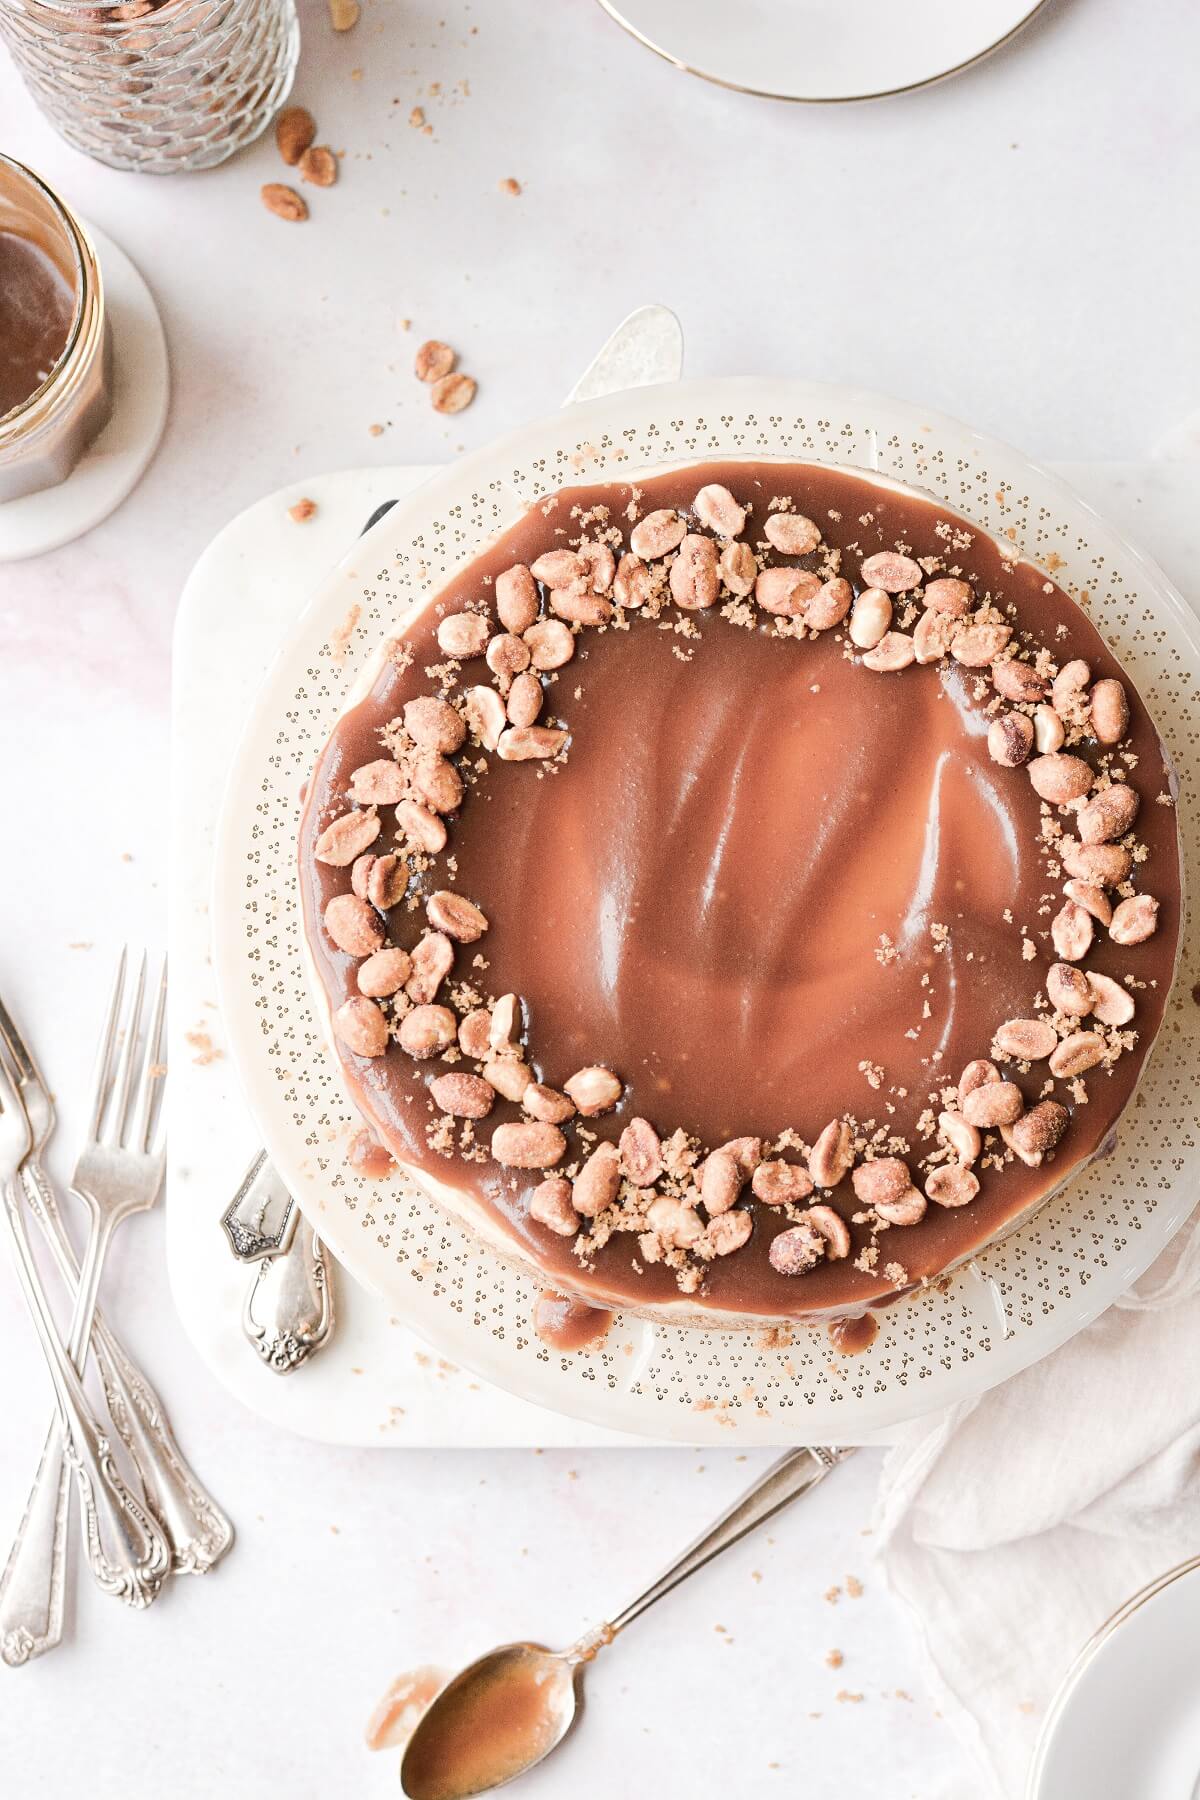 Peanut butter cheesecake with caramel sauce and peanuts.